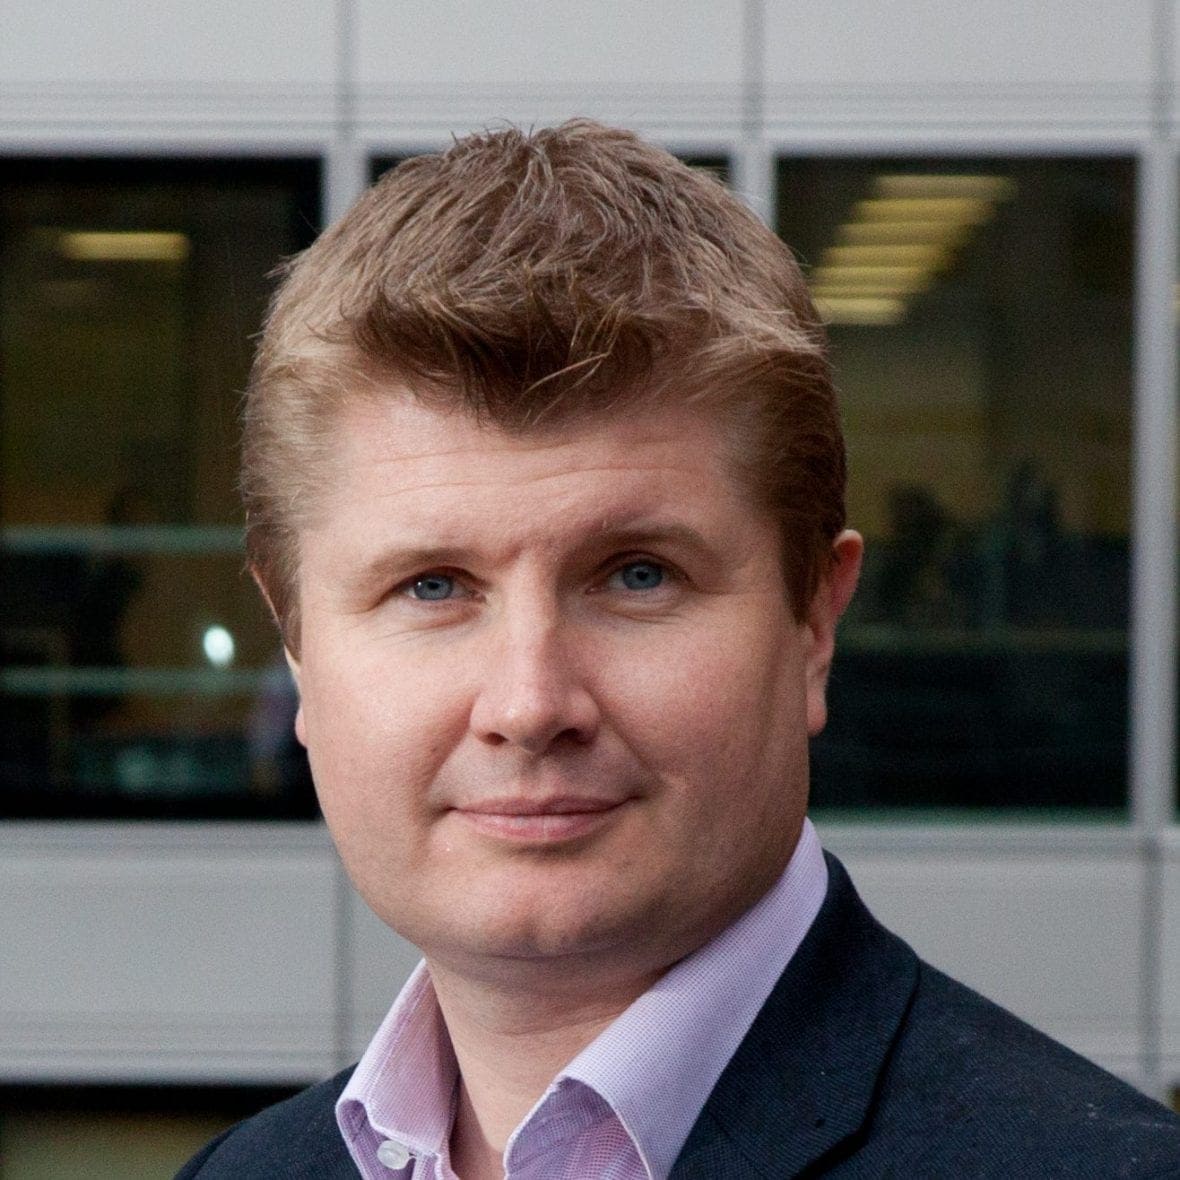 Andy Sparkes, General manager, LexisNexis Enterprise Solutions